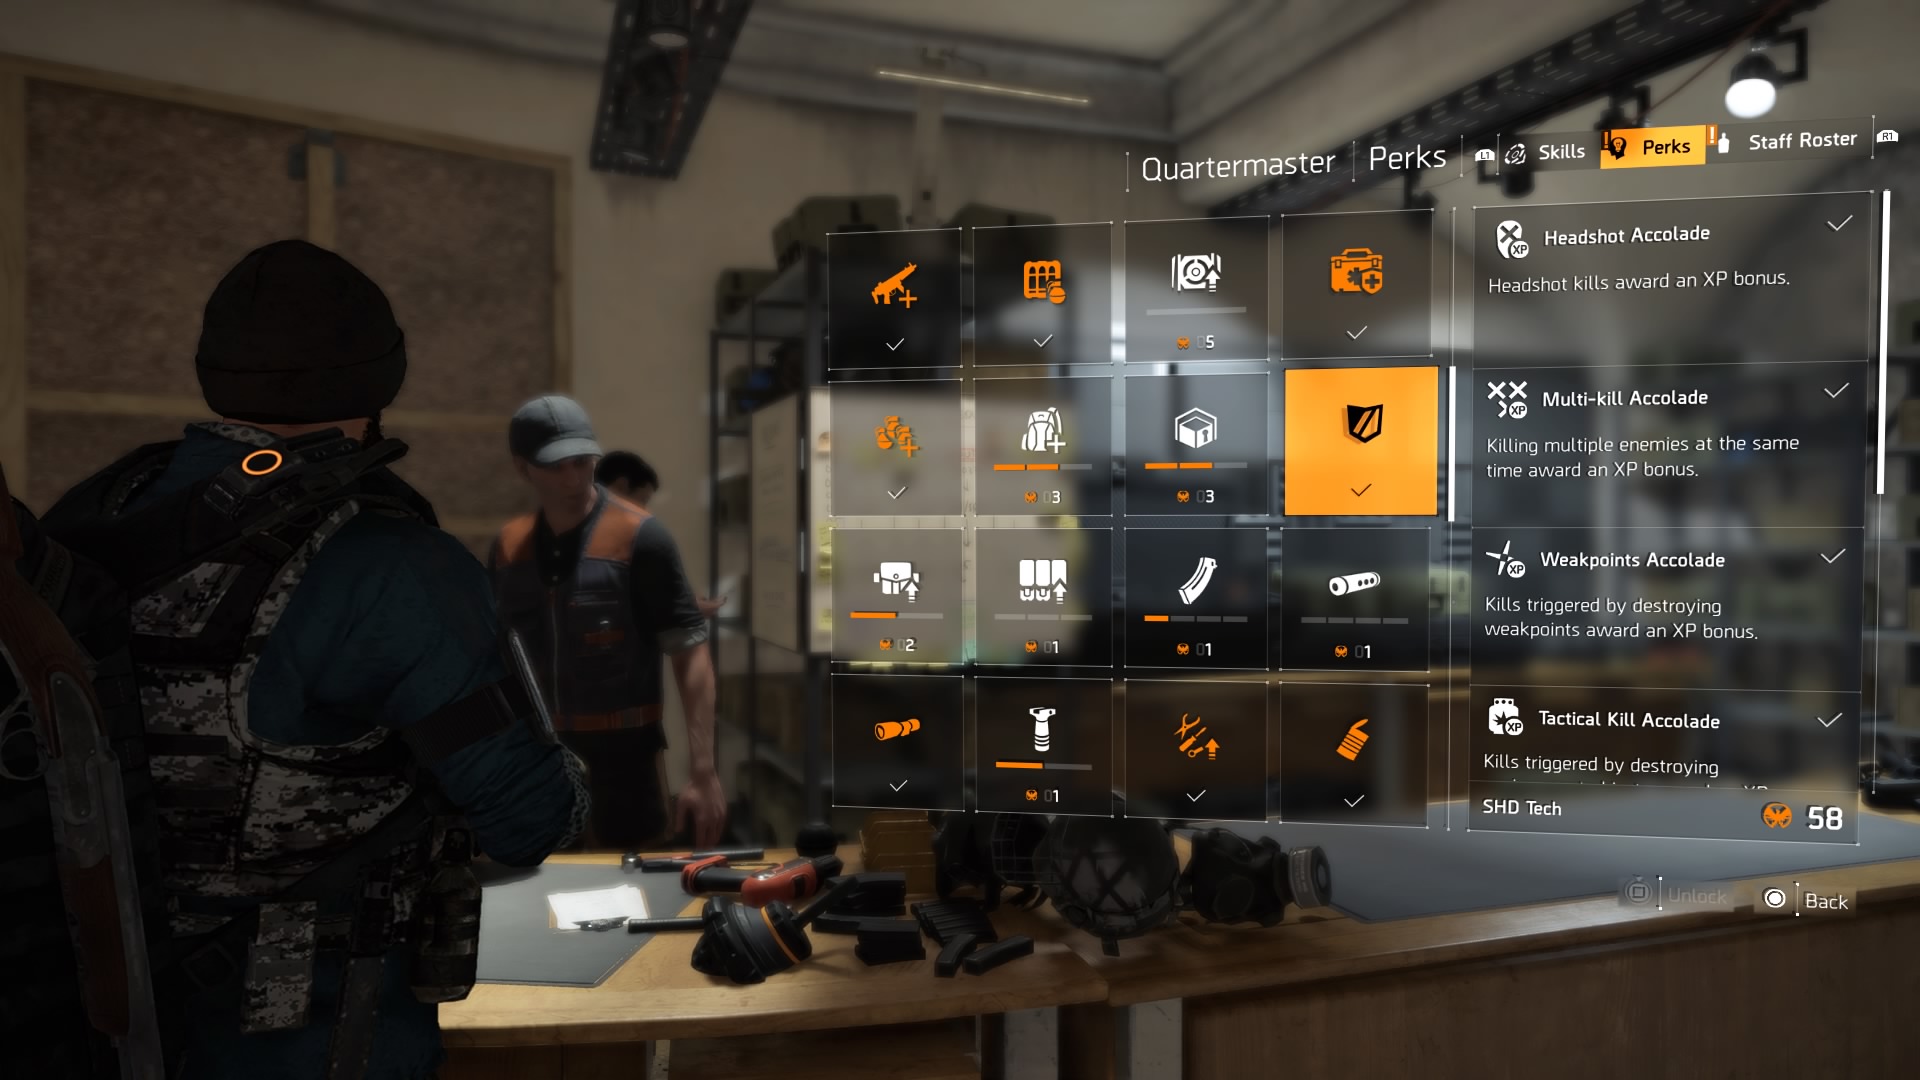 Purchase Accolade perks | How to level fast and reach the endgame in The Division 2